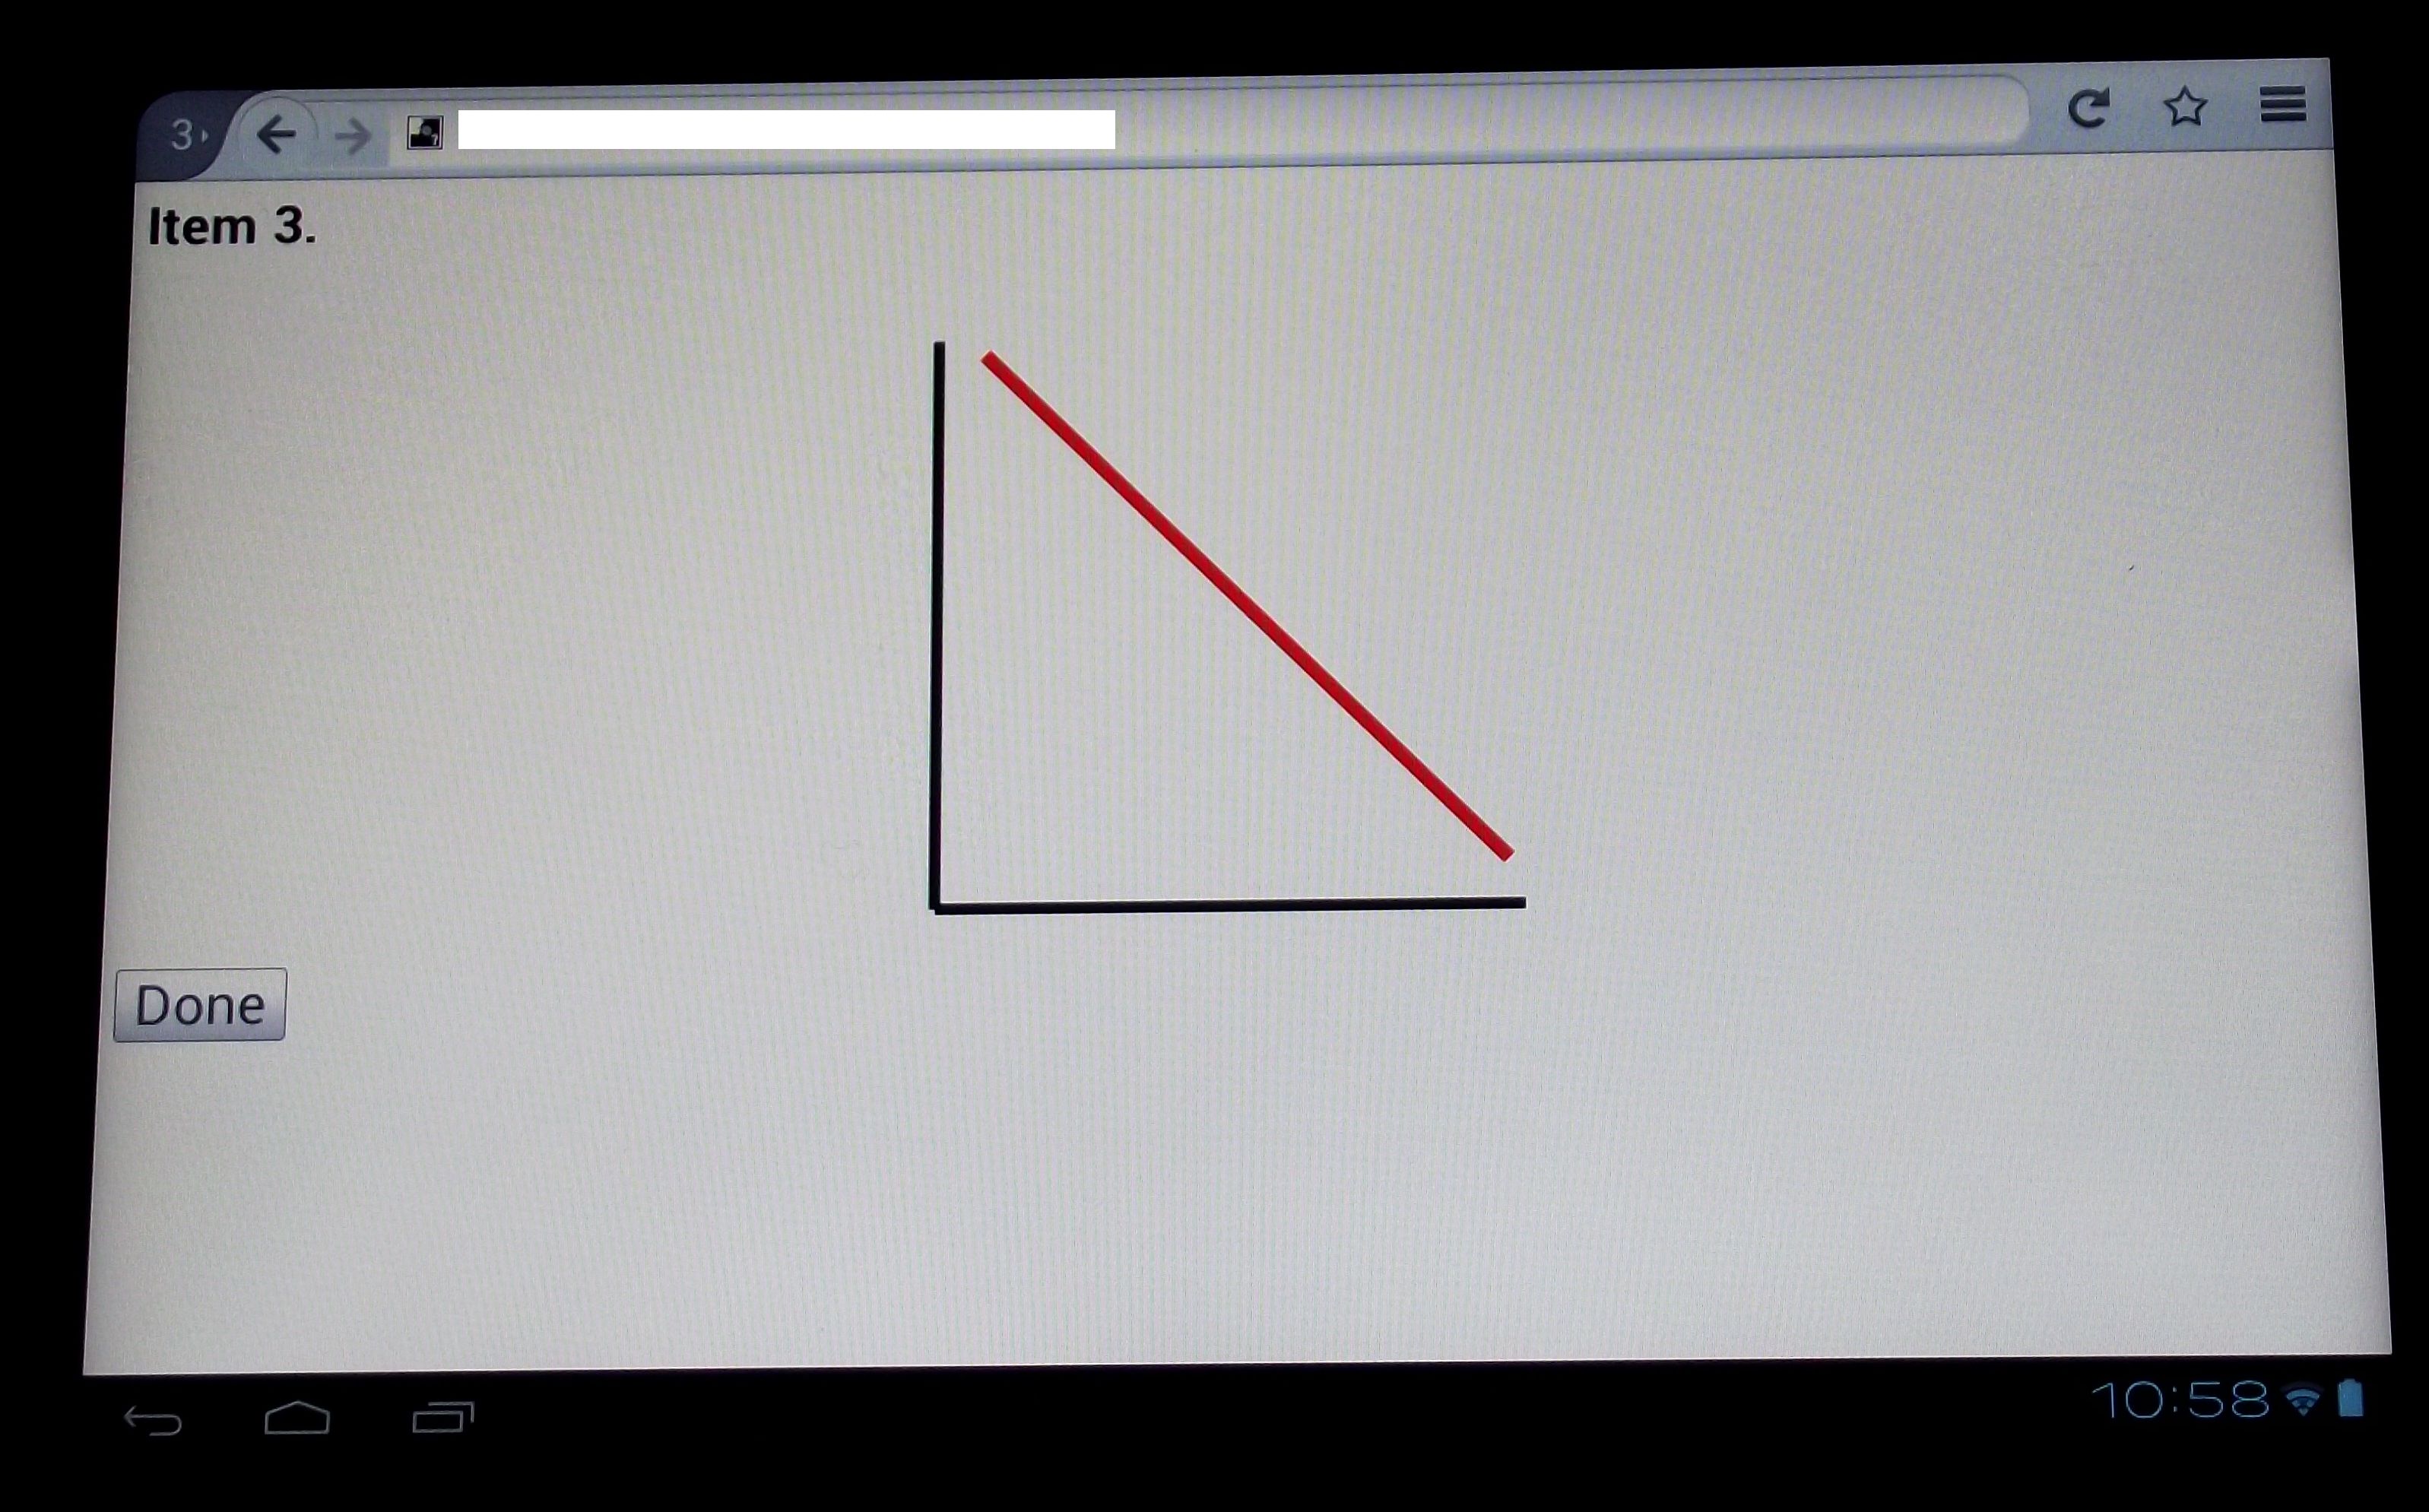 Screen shot of an Android tablet showing prototype vibrotactile (haptic) graph item, a simple line graph with a negative slope.